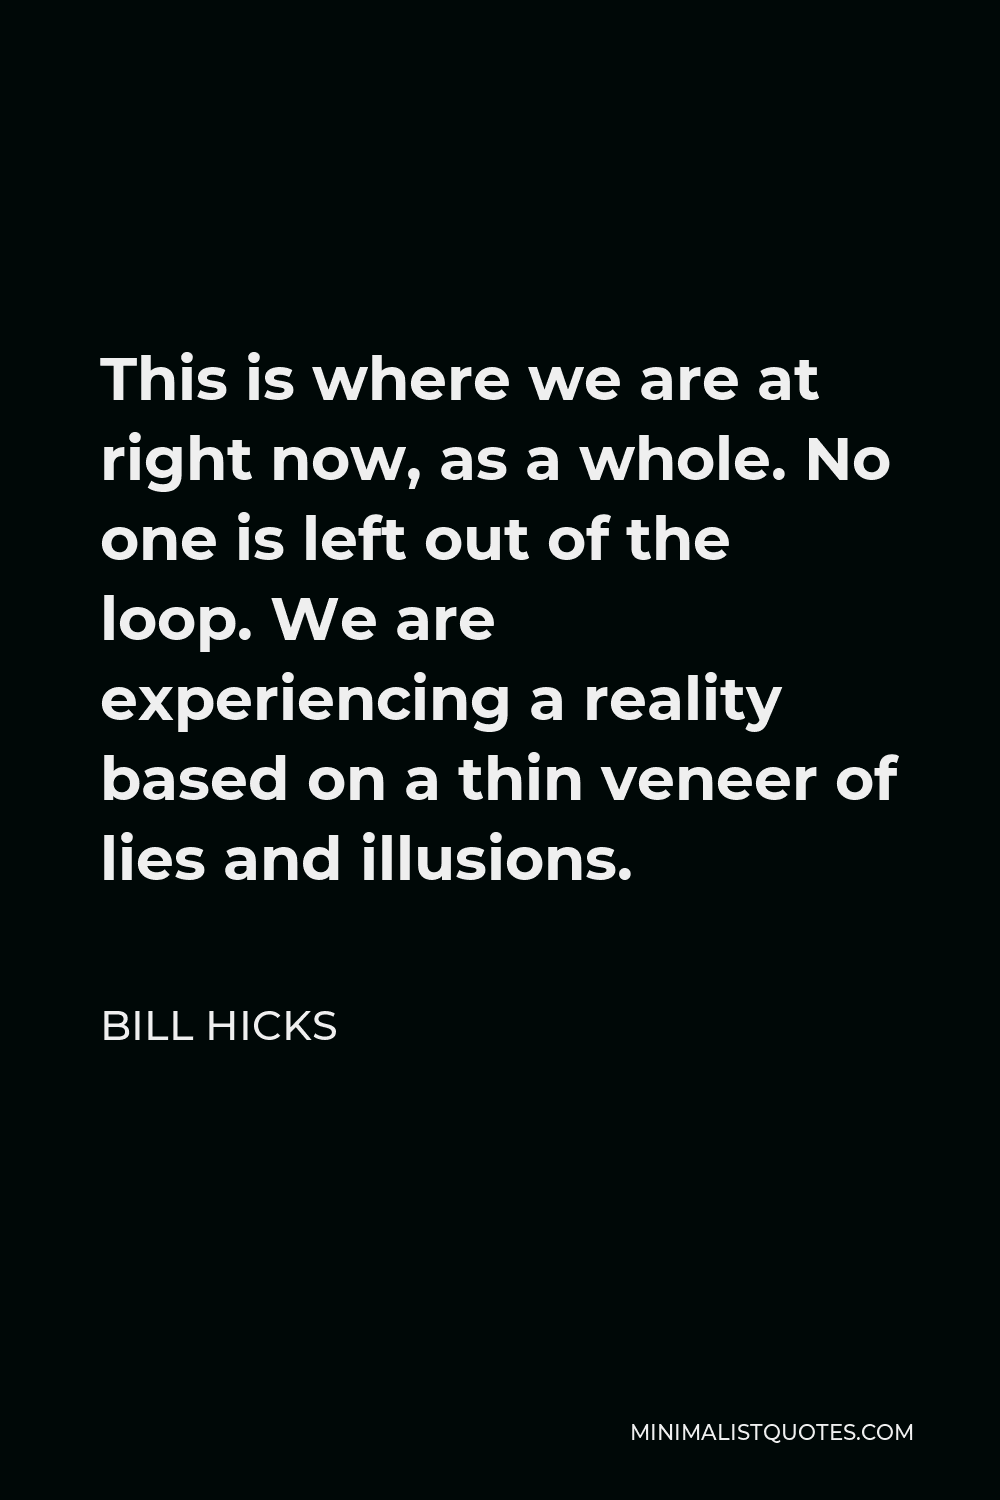 Bill Hicks Quote - This is where we are at right now, as a whole. No one is left out of the loop. We are experiencing a reality based on a thin veneer of lies and illusions.